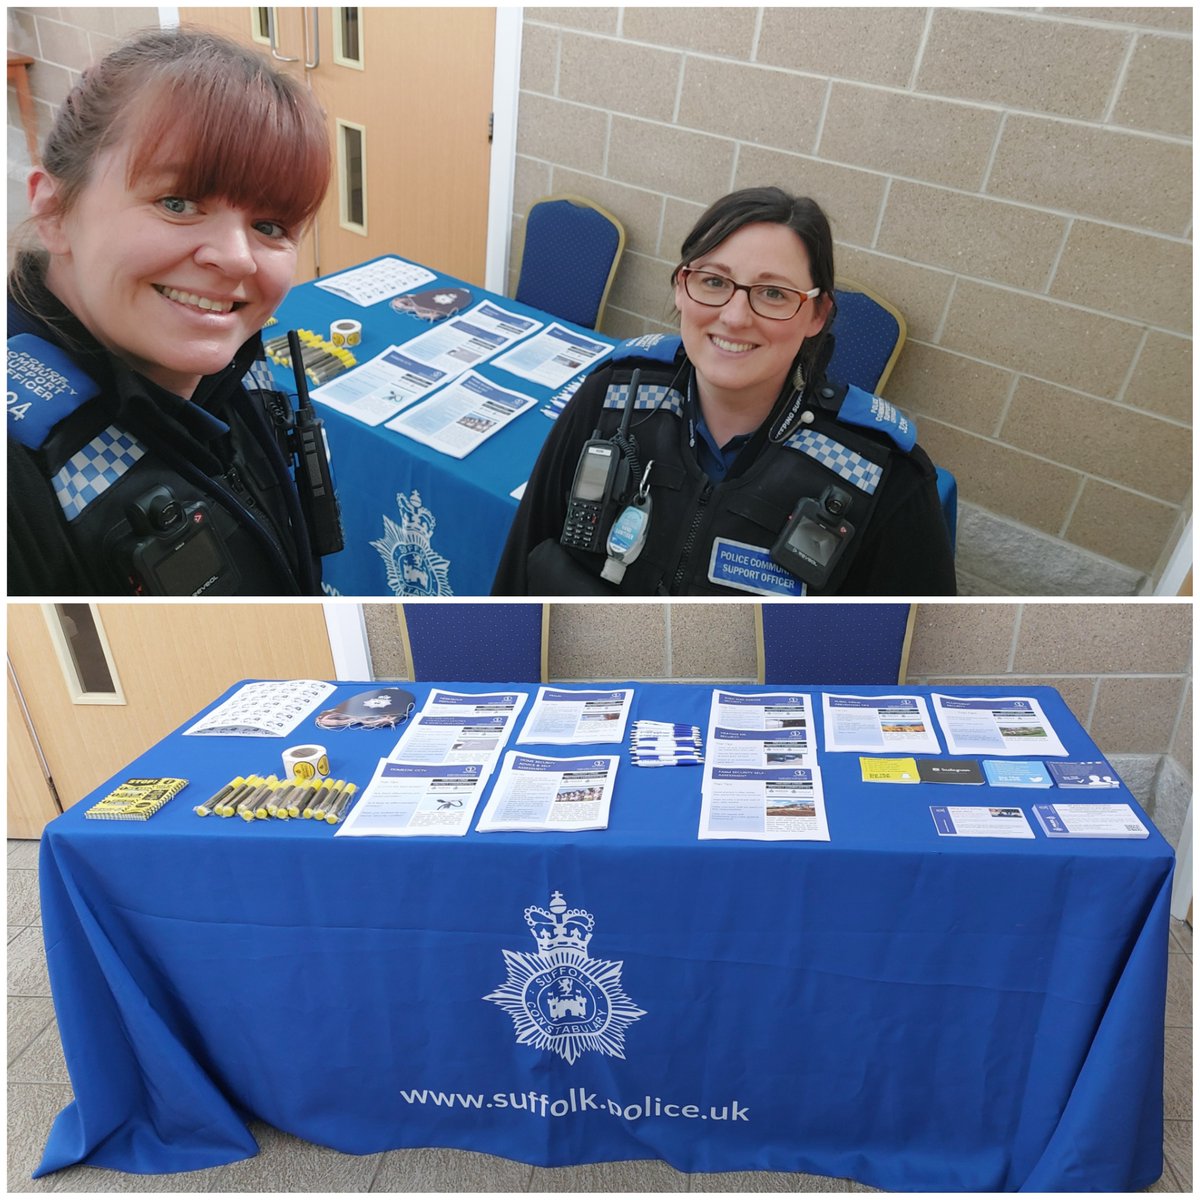 Get down and see the PCSO's at Stanton village hall they would love to see you..........